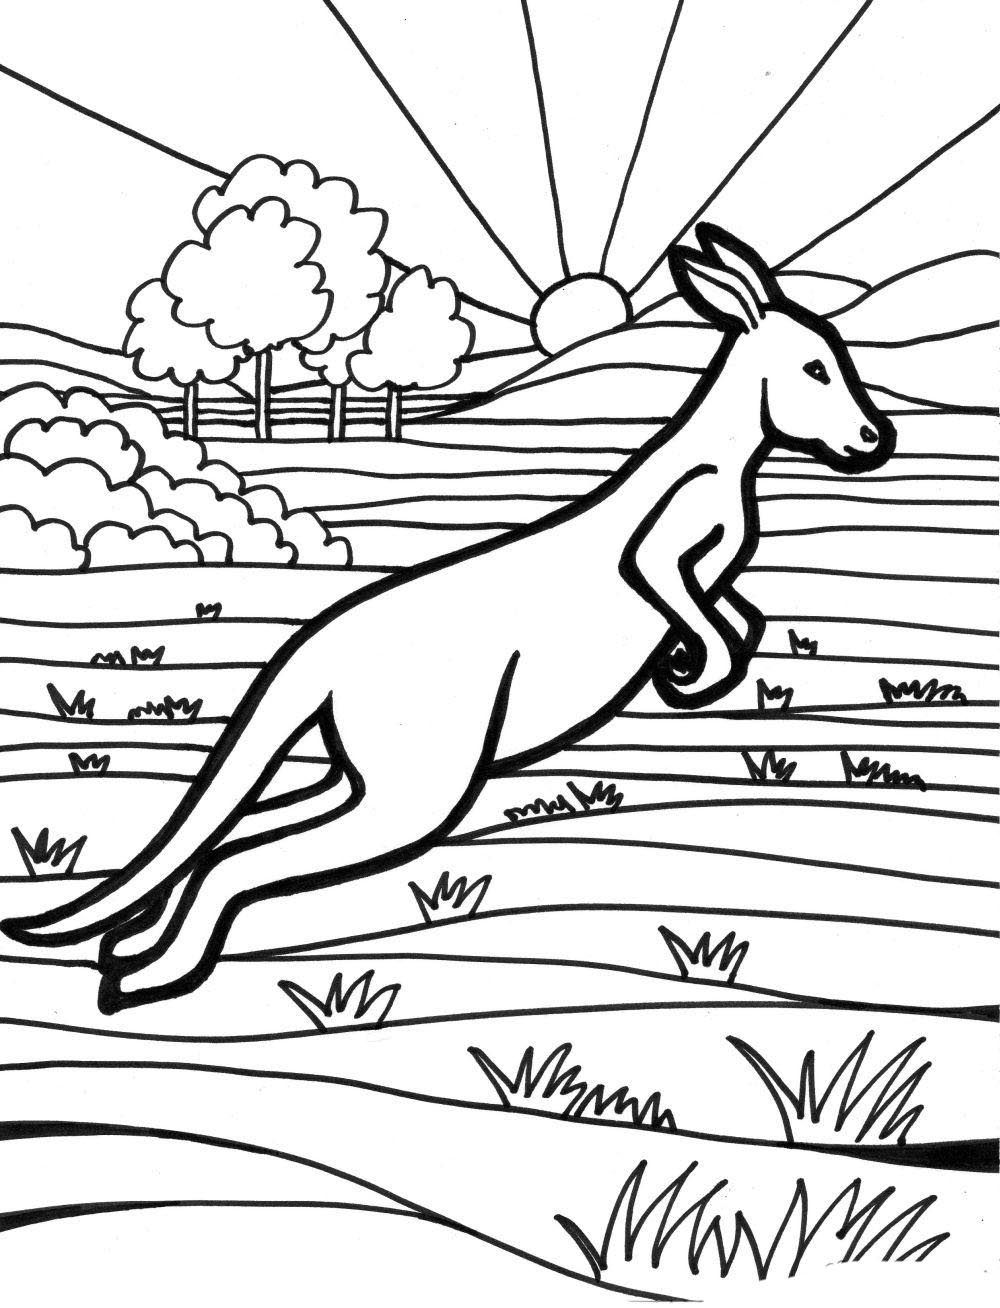 Australia coloring pages to download and print for free